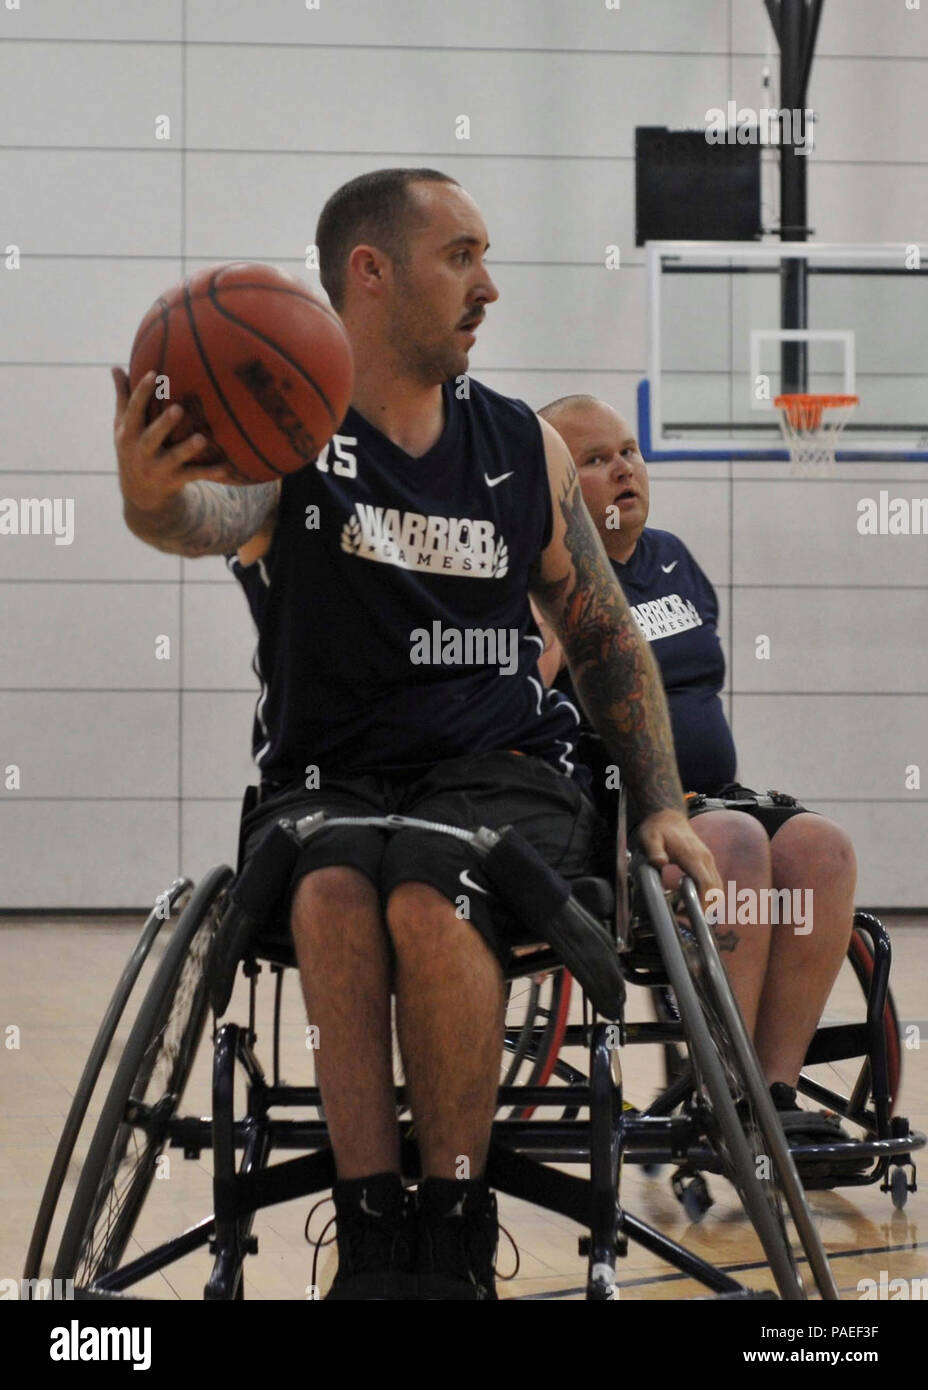 Team Navy/Coast Guard member retired Aviation Electrician's Mate Steven Davis of Turlock, Calif., takes command of the ball in a wheelchair basketball game against Team Air Force during the 2013 Warrior Games May 14. The Warrior Games includes competitions in archery, cycling, seated volleyball, shooting, swimming, track and field, and wheelchair basketball. The goal of the Warrior Games is not necessarily to identify the most skilled athletes, but rather to demonstrate the incredible potential of wounded warriors through competitive sports. More than 200 wounded, ill, or injured service membe Stock Photo